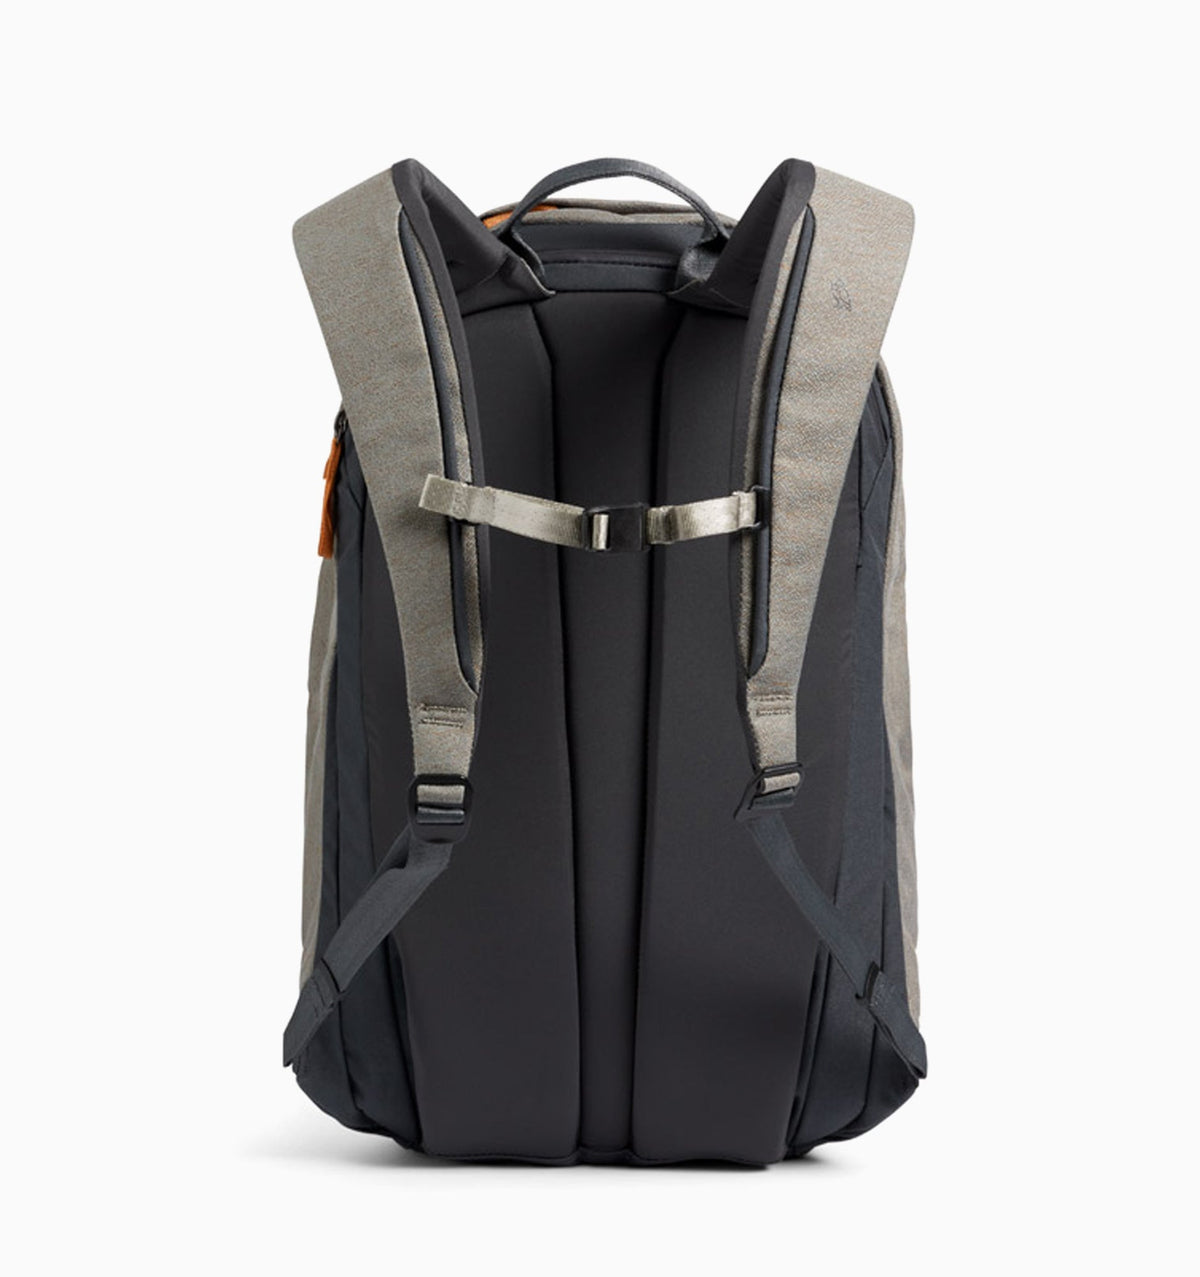 Bellroy Classic Laptop Backpack Plus (Second Edition) - Limestone